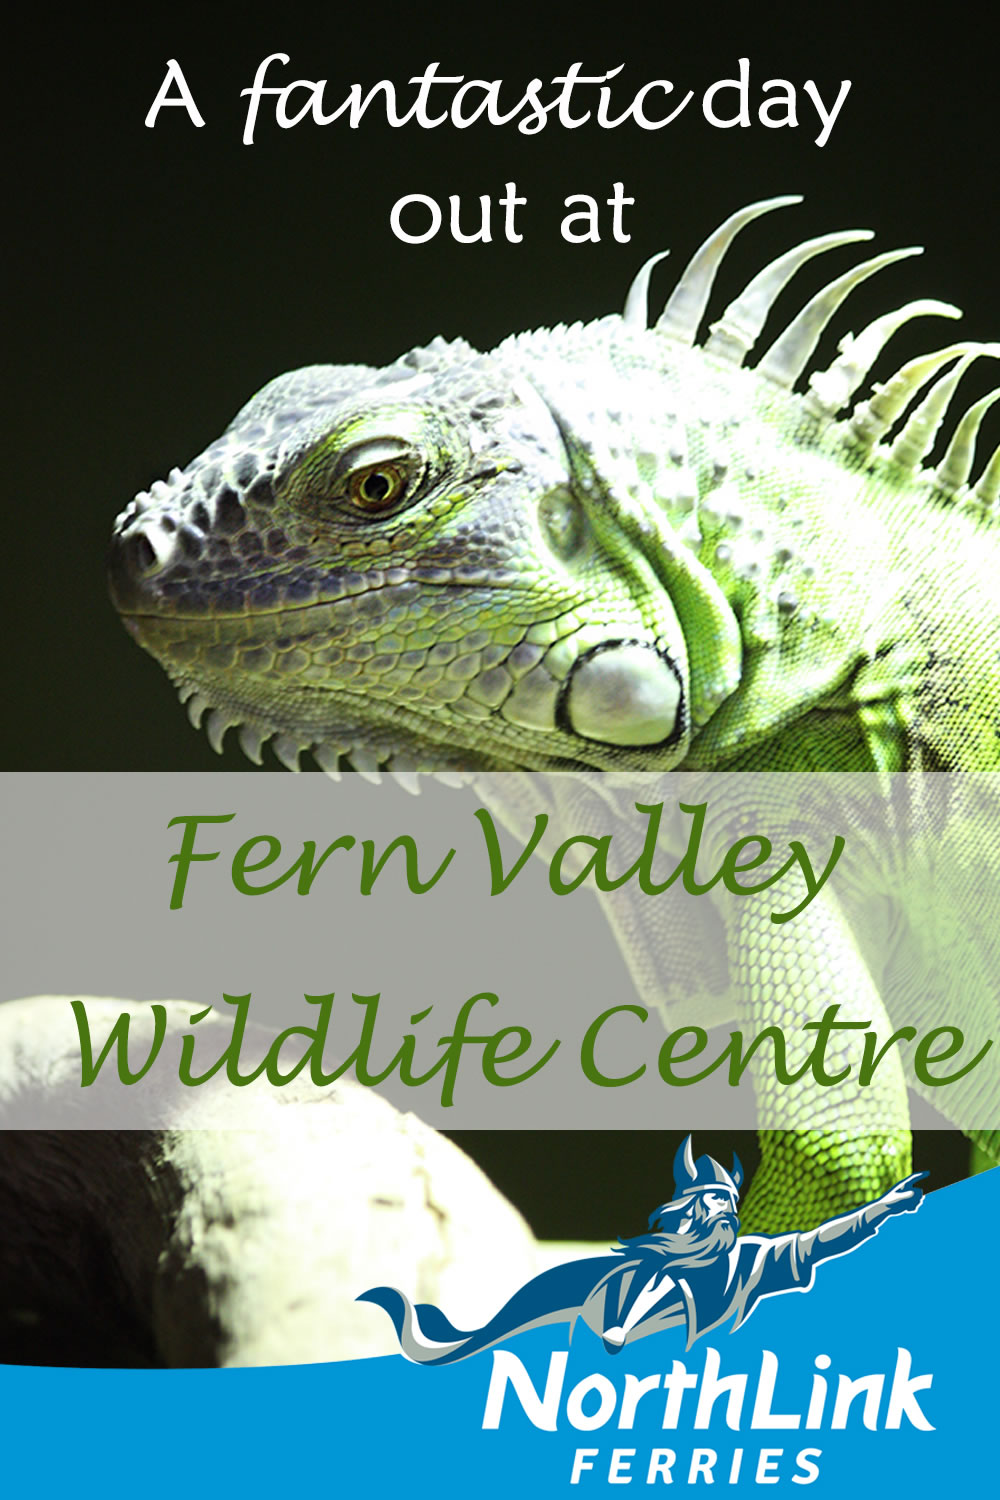 A fantastic day out at Fern Valley Wildlife Centre